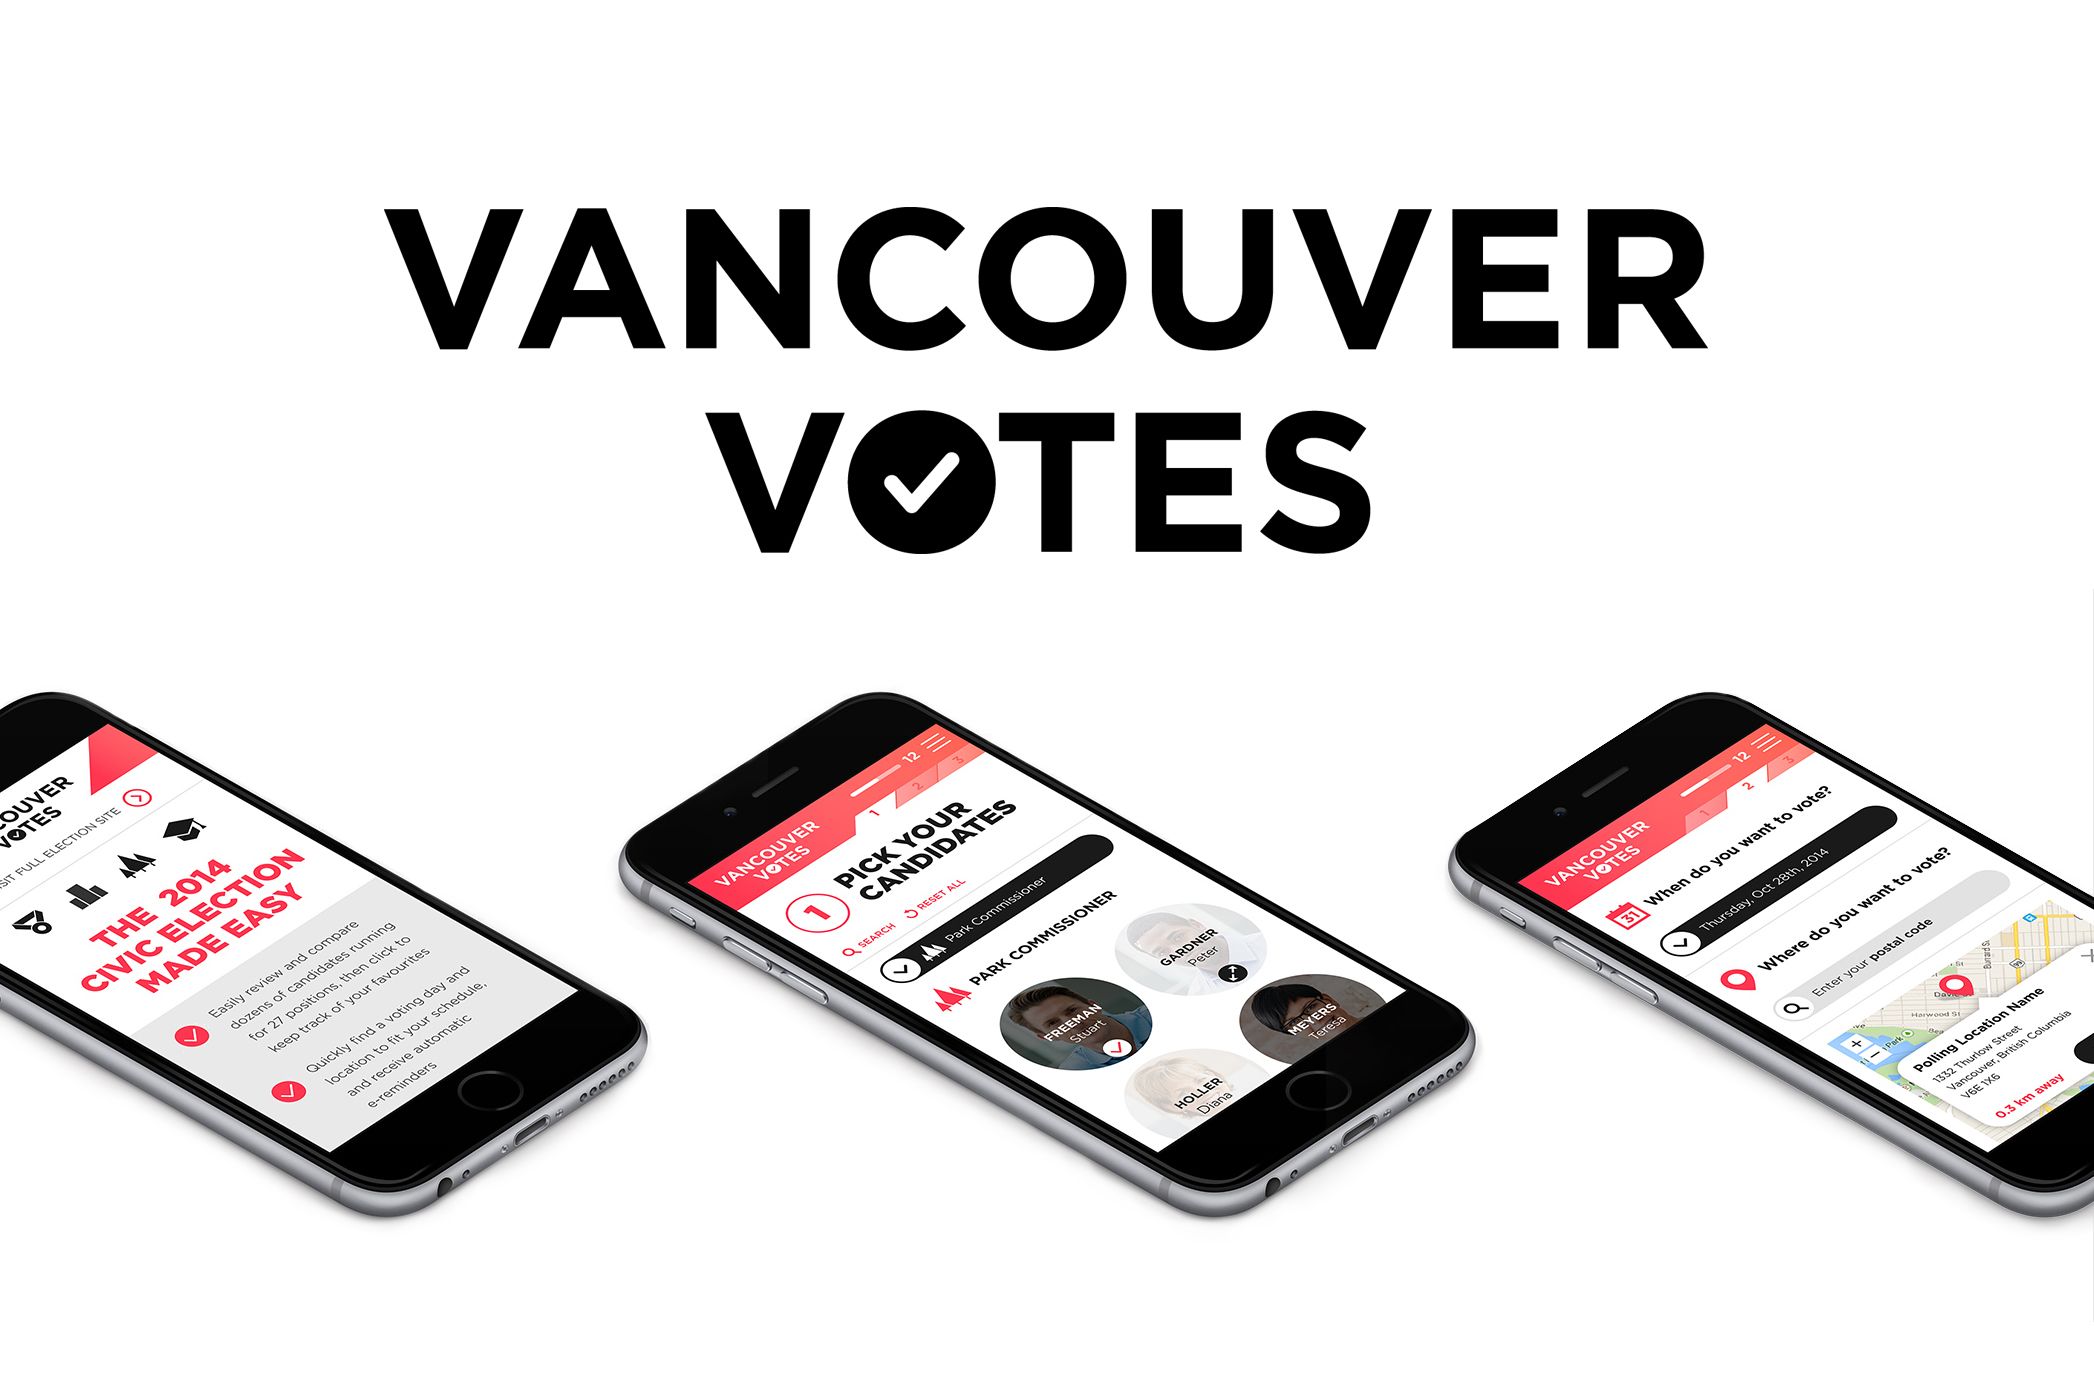 Three cellphone with the Vancouver Vote app displaying, representing the app used in the Vancouver Civic Election